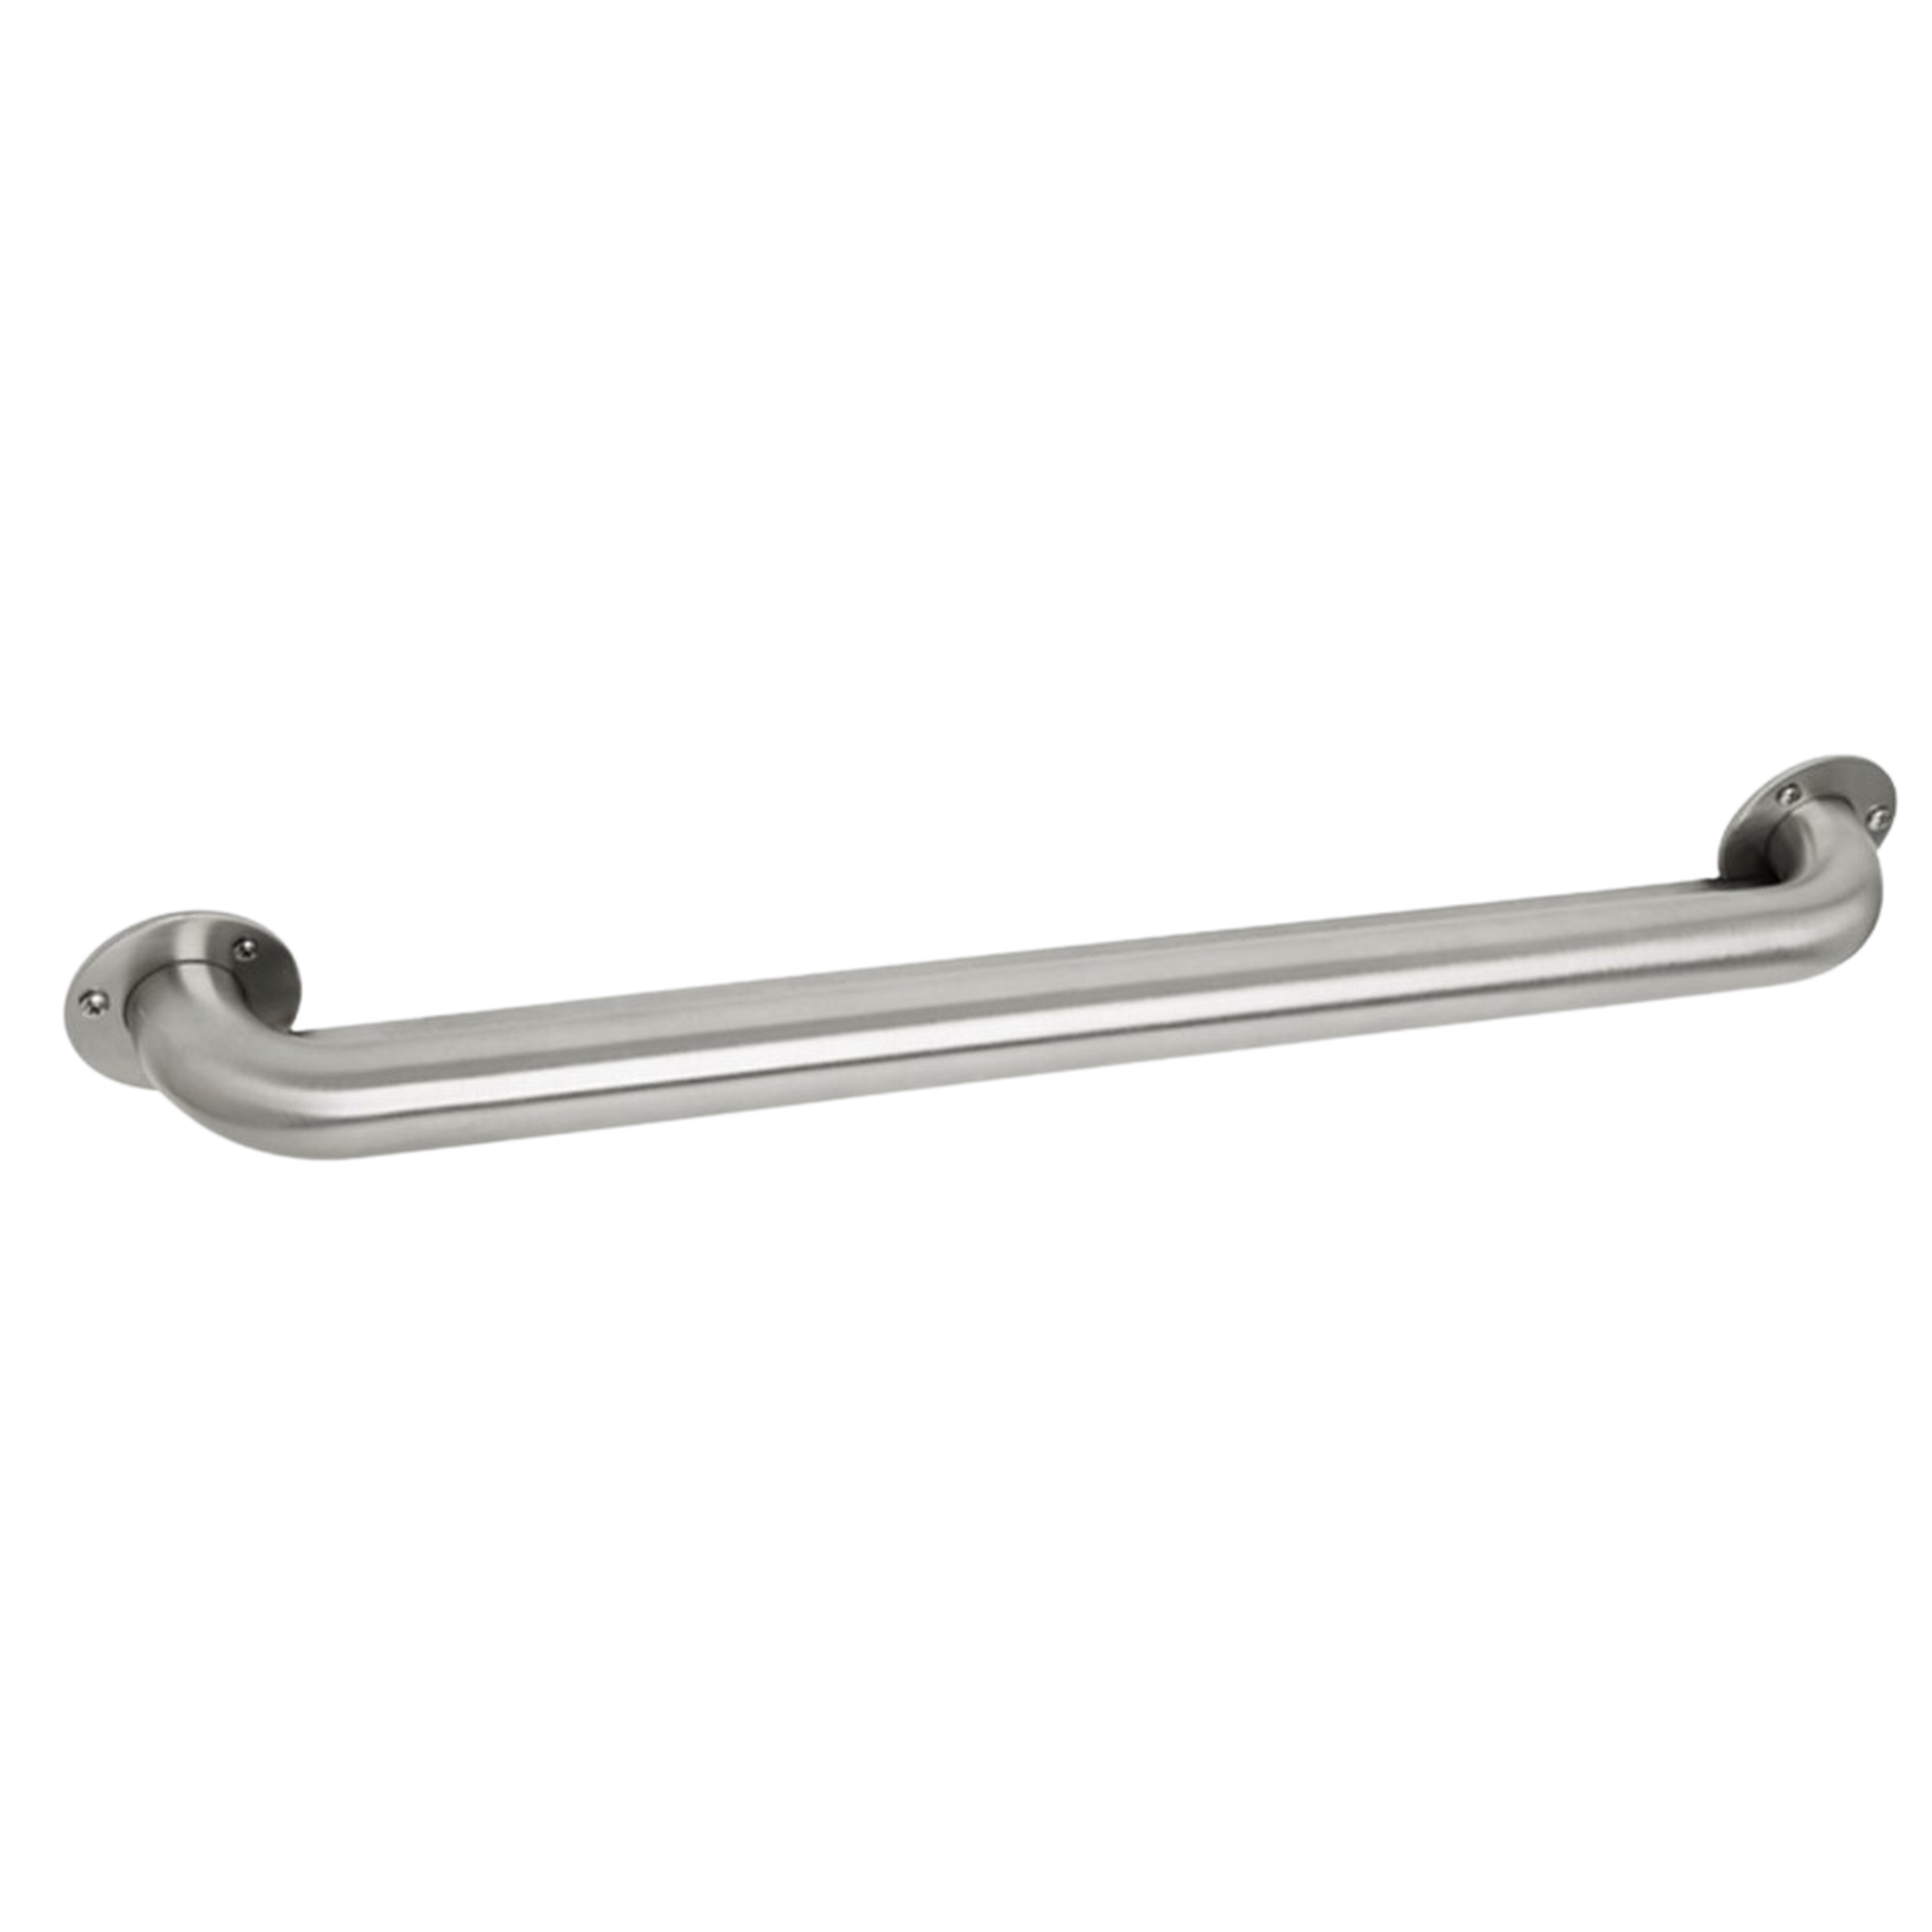 Seachrome Signature Series 48" Satin Stainless Steel 1.5 Diameter Exposed 3-Hole Mounting Flange Switch Weld Standard Ligature Resistant Grab Bar